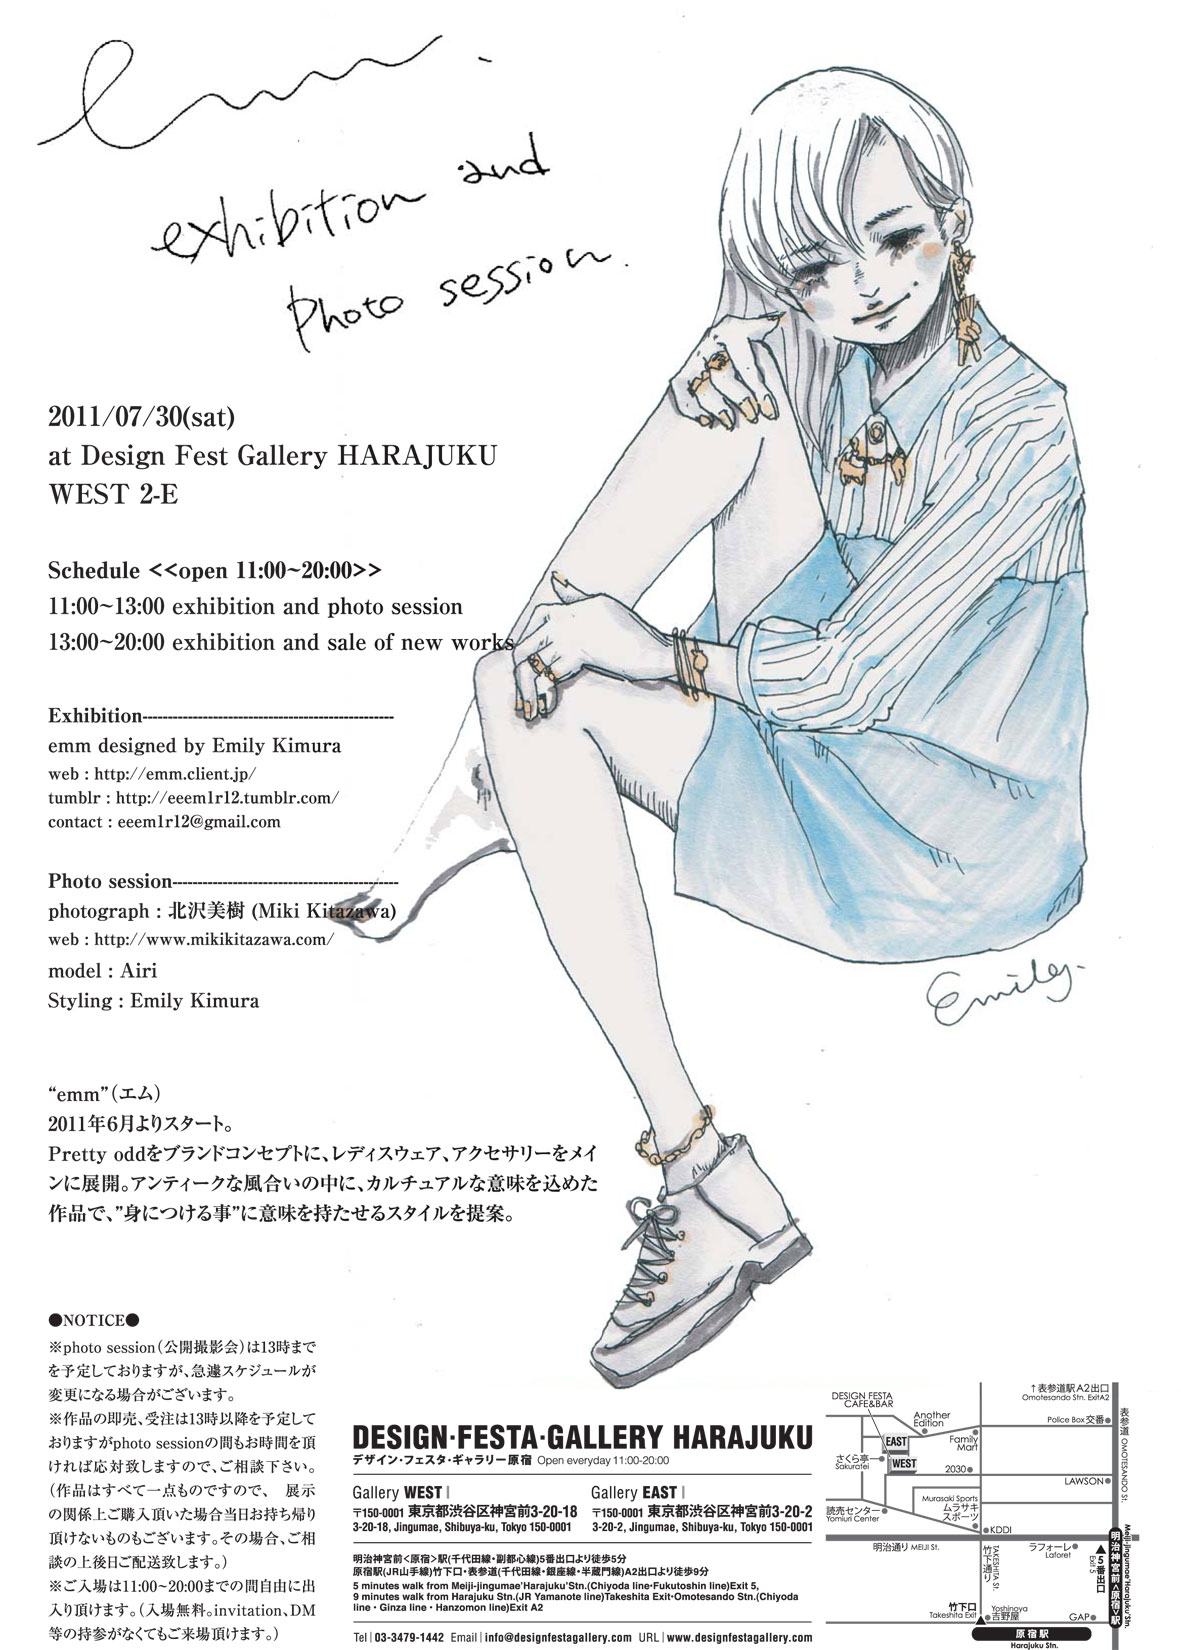 emm exhibition and photo session 2011/07/30(sat) at Design Fest Gallery HARAJUKU_b0132059_20241742.jpg